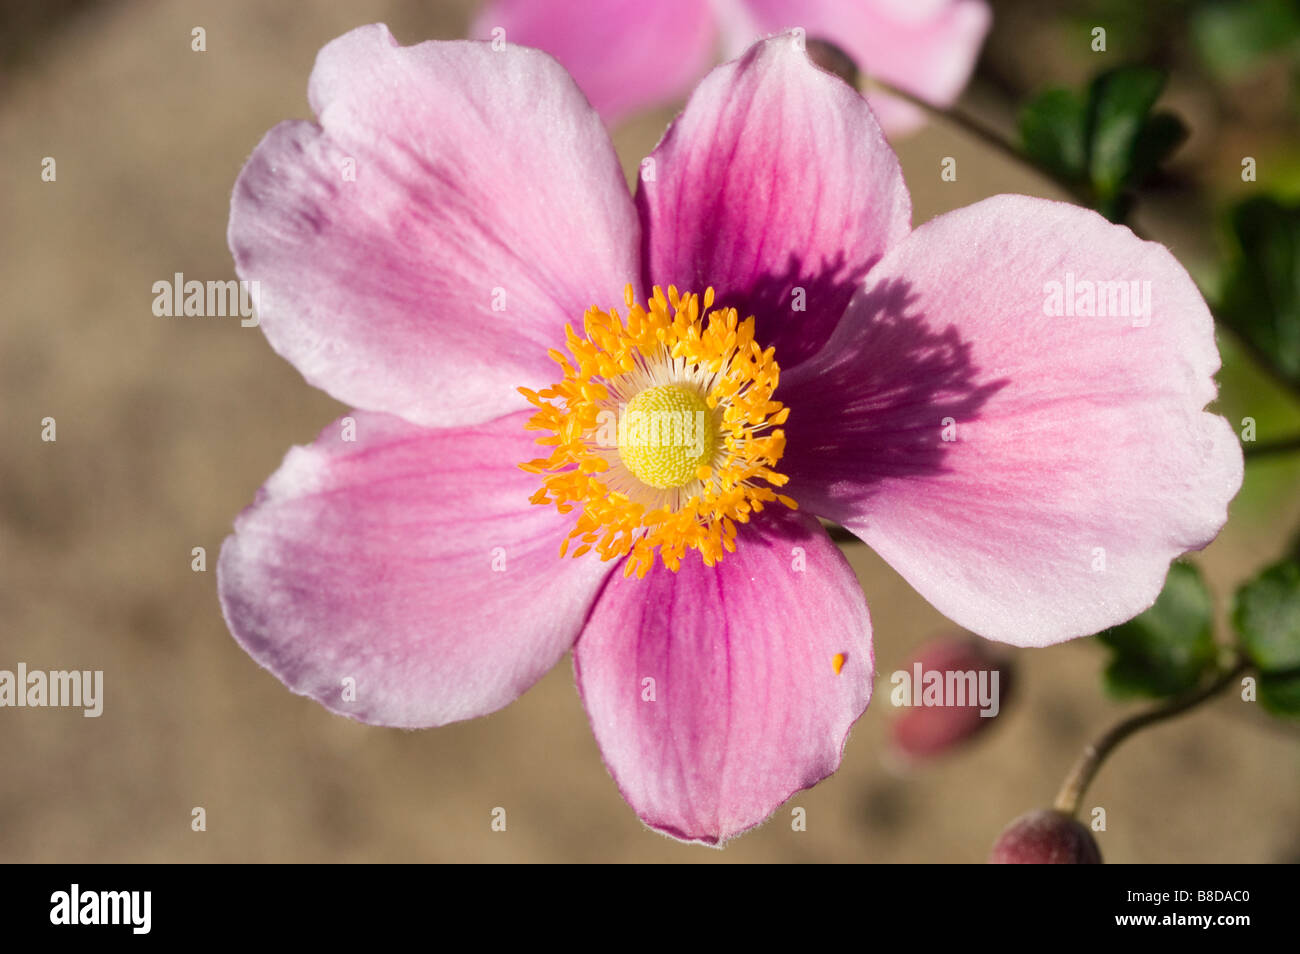 Thimbleweed giapponese, Giapponese, Windflower Anemone giapponese, Giapponese Thimbleflower, Anemone hupehensis hort. Il fascino di settembre Foto Stock